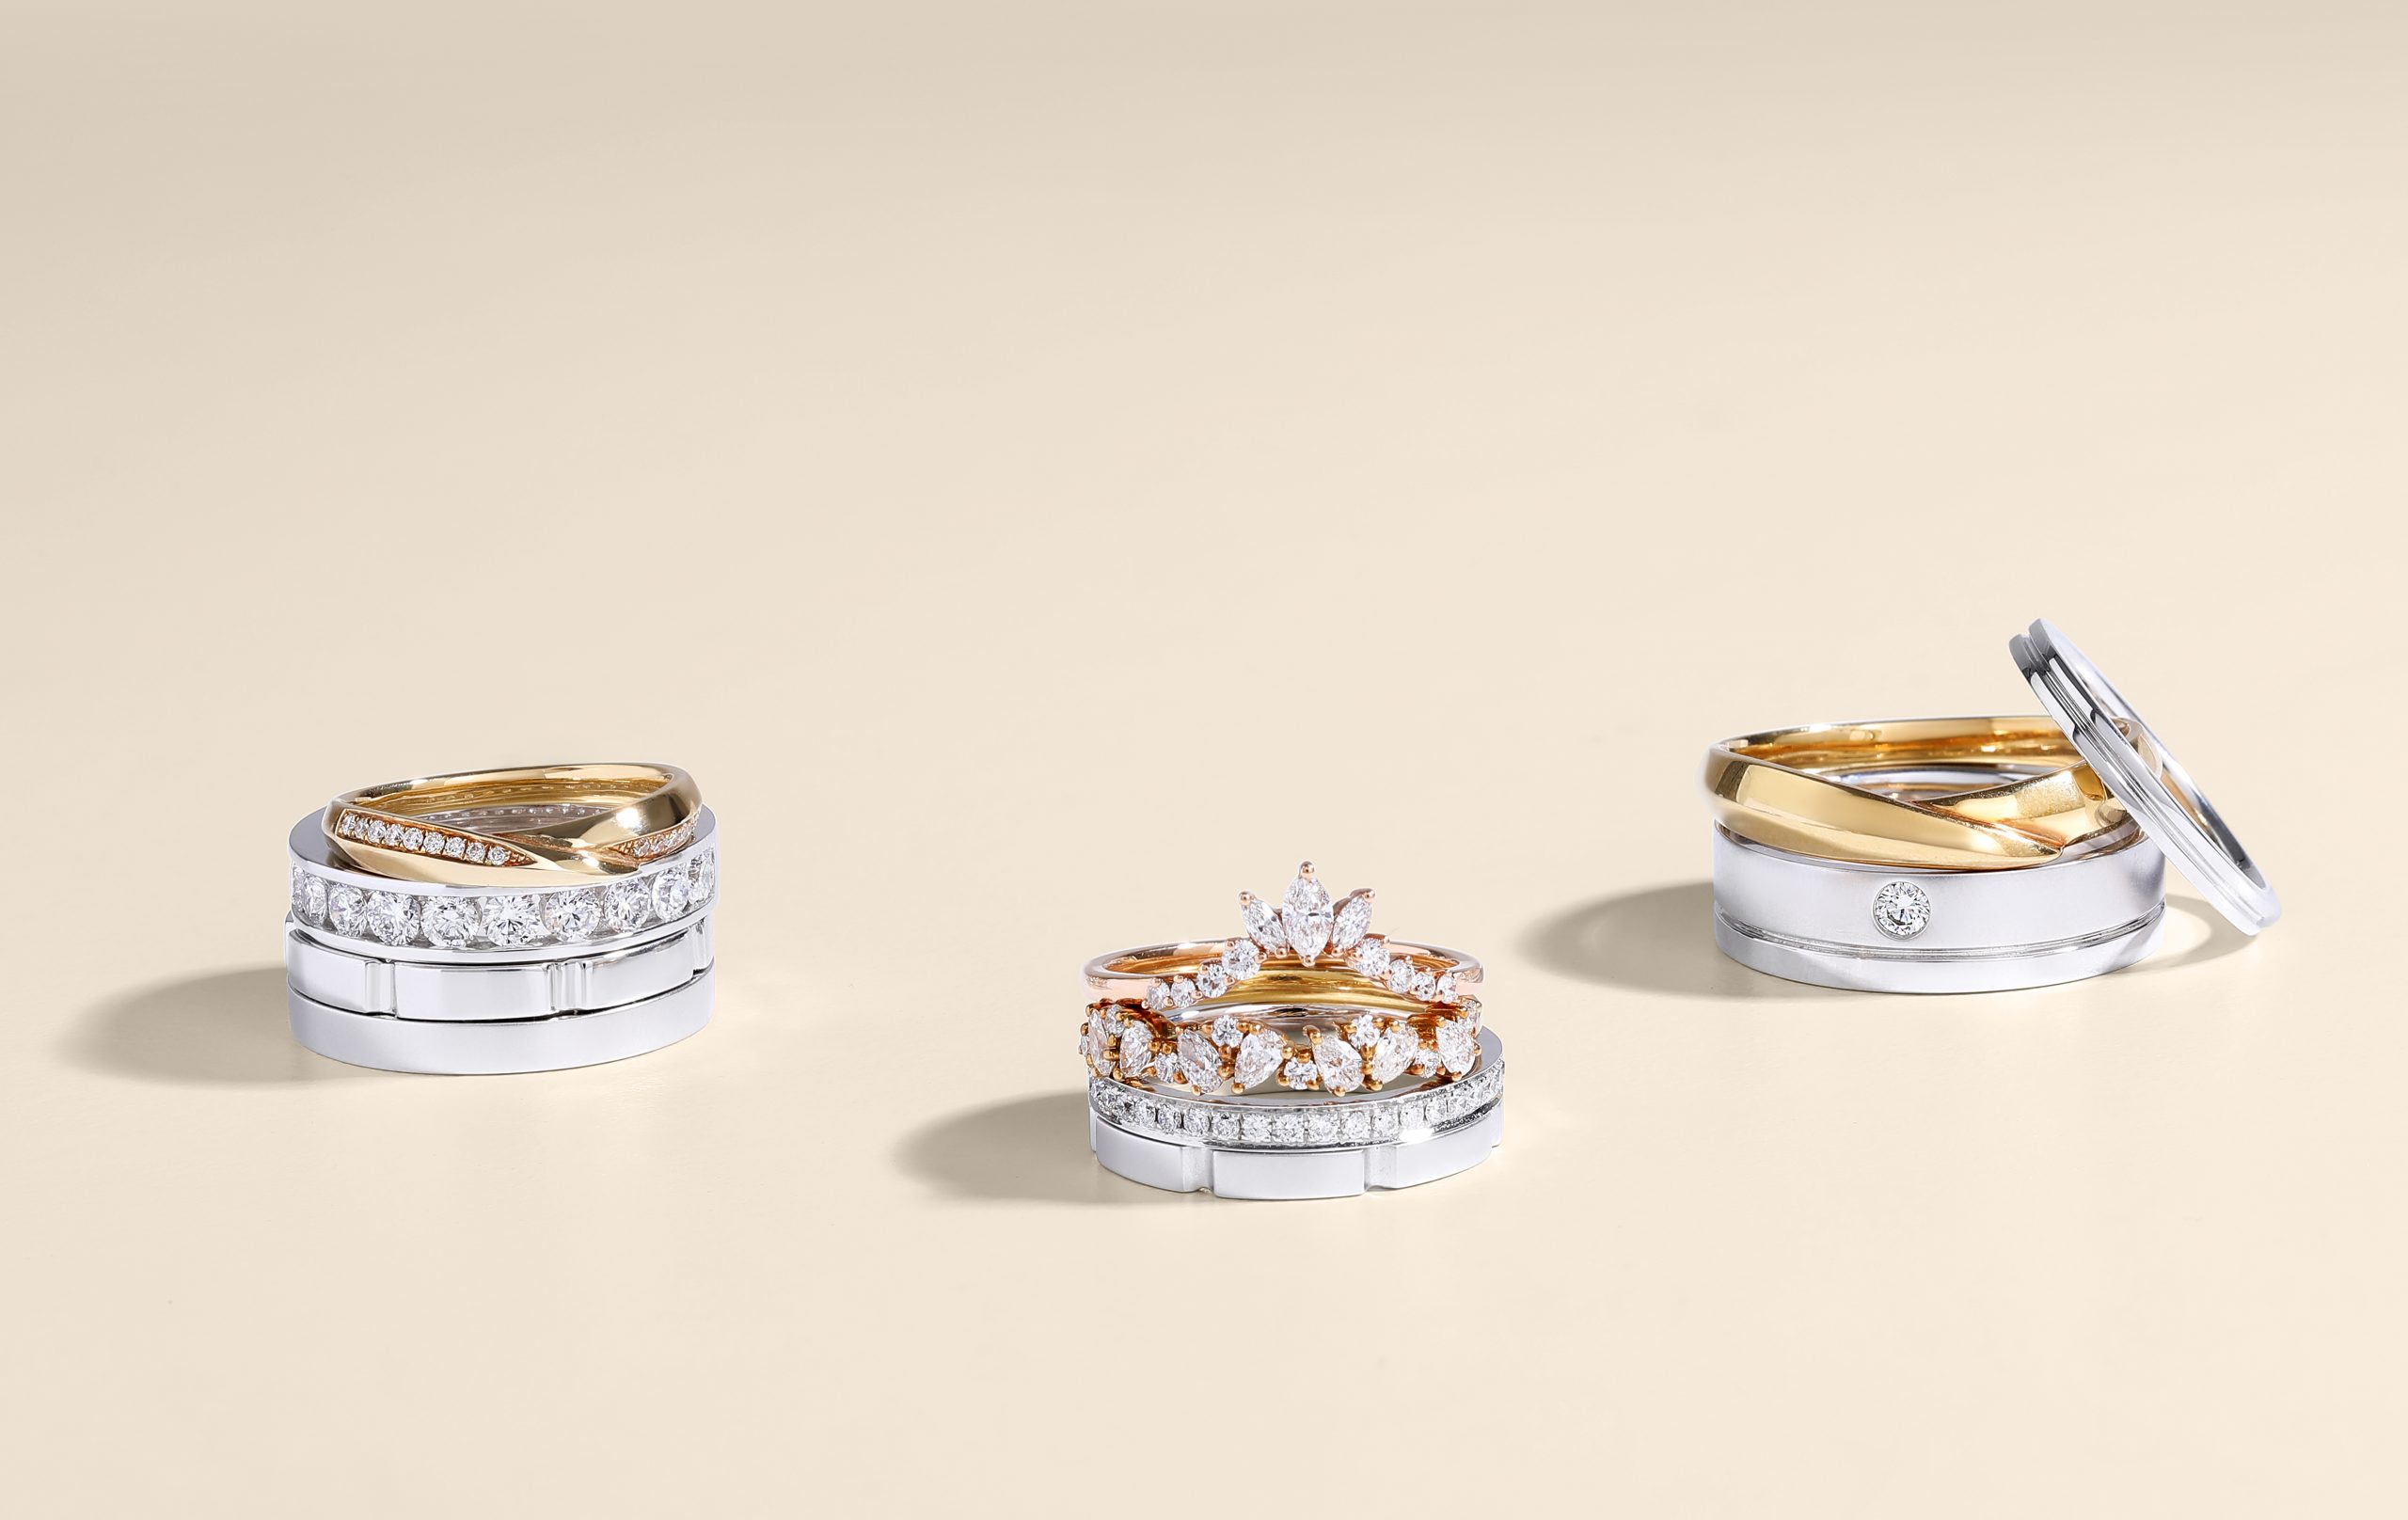 Yellow Gold vs White Gold: What Are The Key Differences?